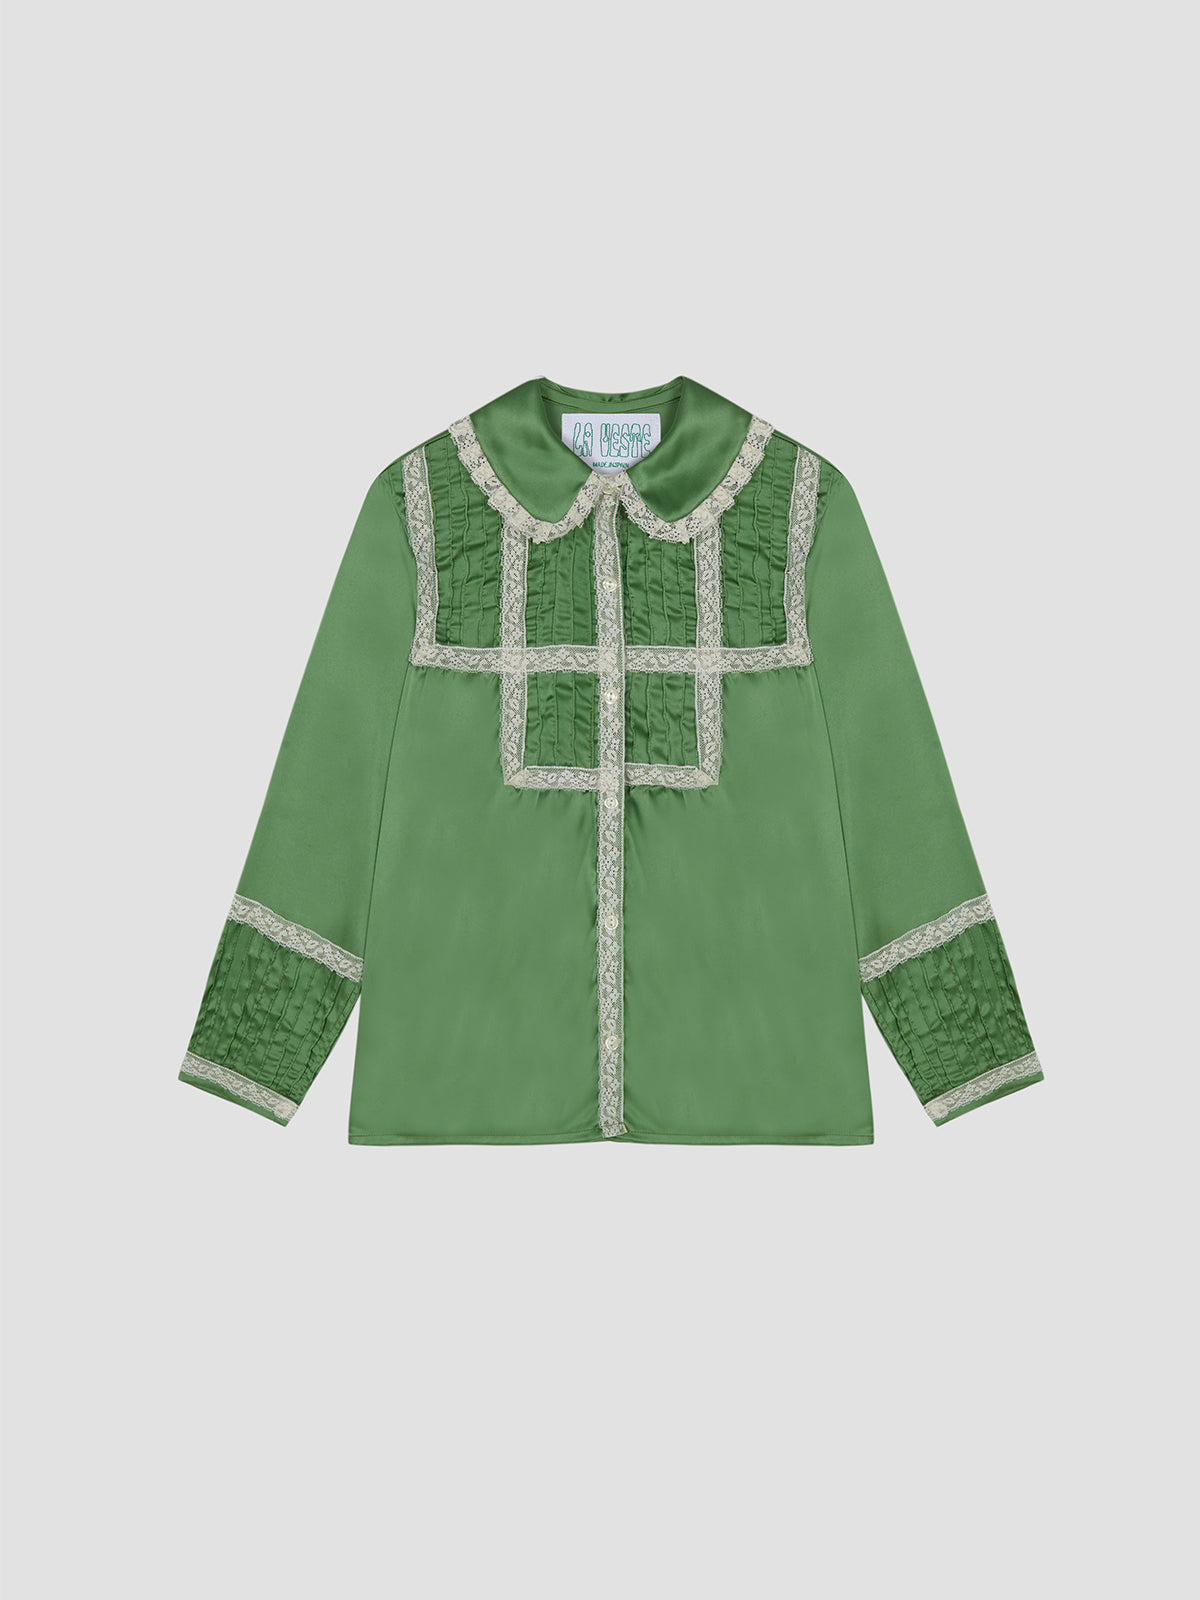 Olive green shirt with geometric lace pattern and pleated details.